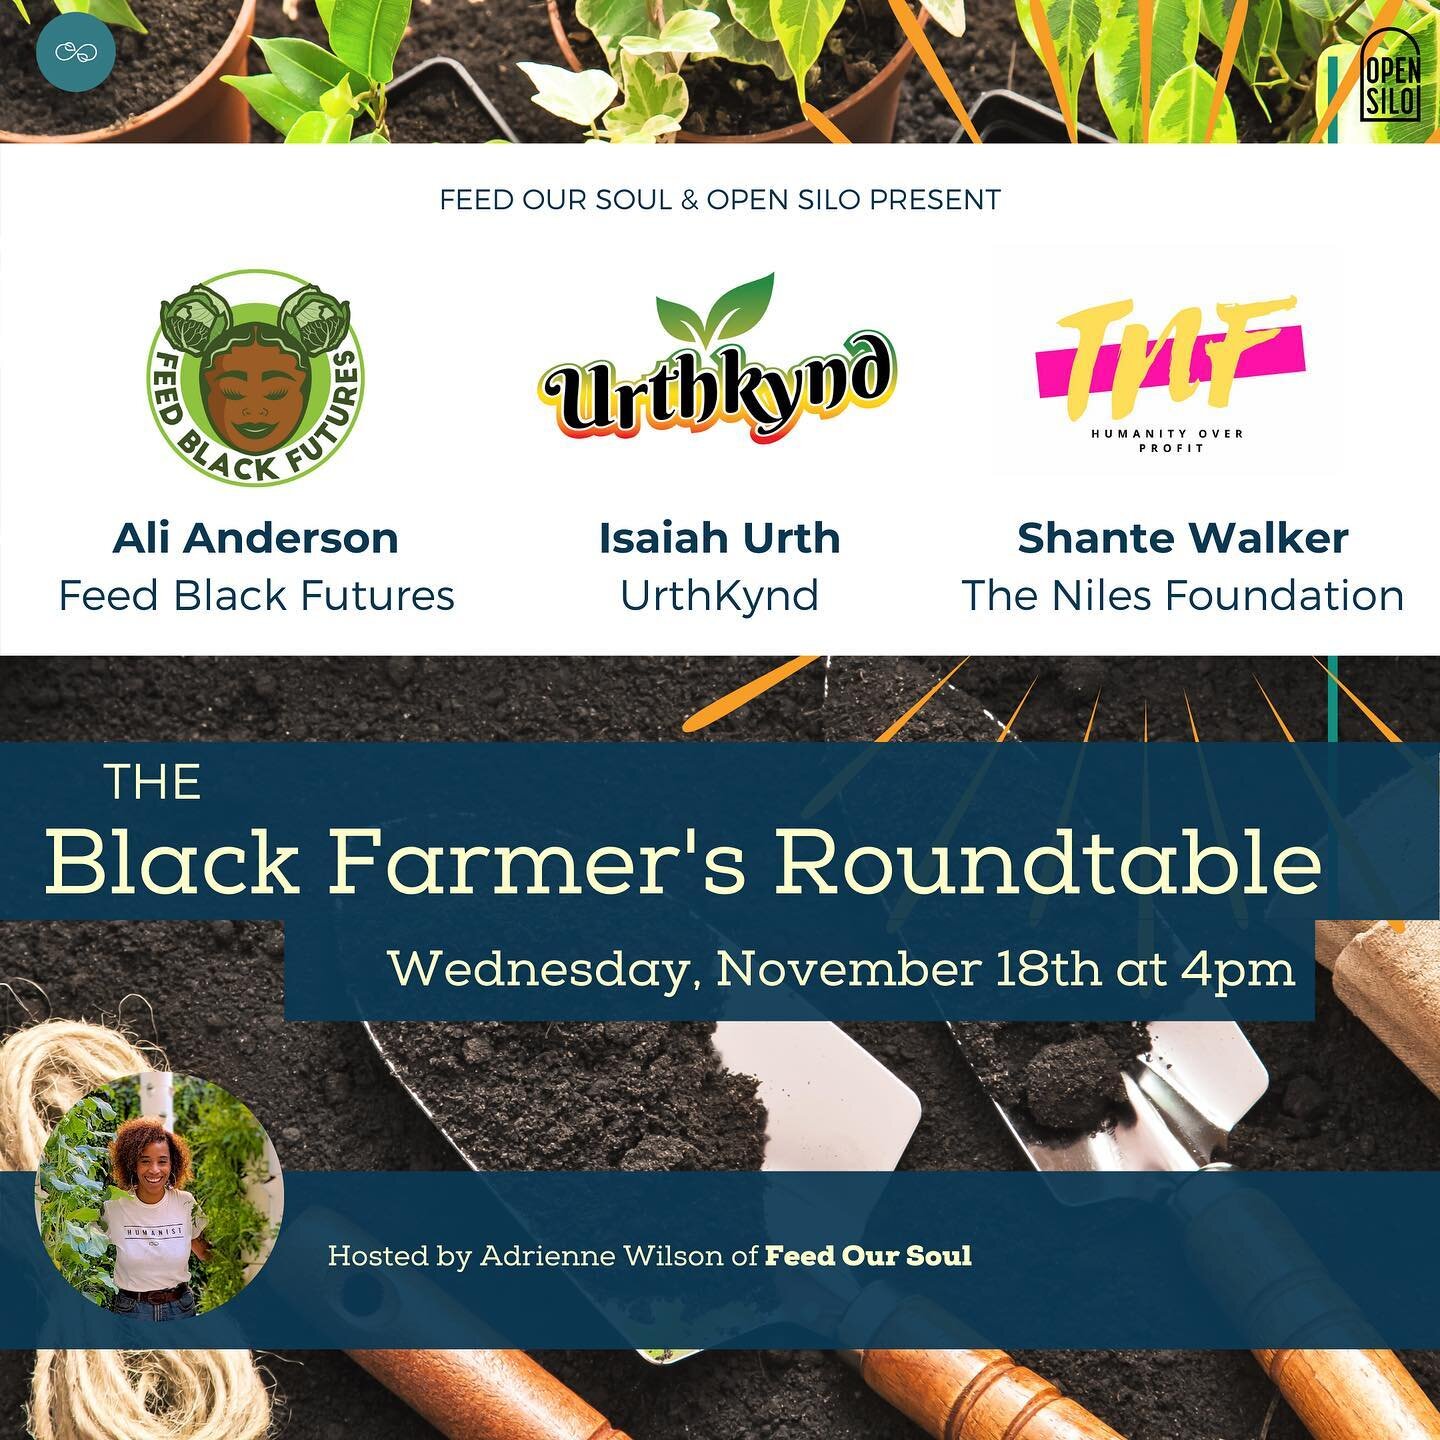 The Black Farmer's Roundtable is back! Join Adrienne Wilson of @feedoursoul TOMORROW (11/19) for a conversation with Ali Anderson @feedblackfutures , Isaiah Urth @urthkynd, and Shante Walker @the_niles_foundation. These visionary folks have all start